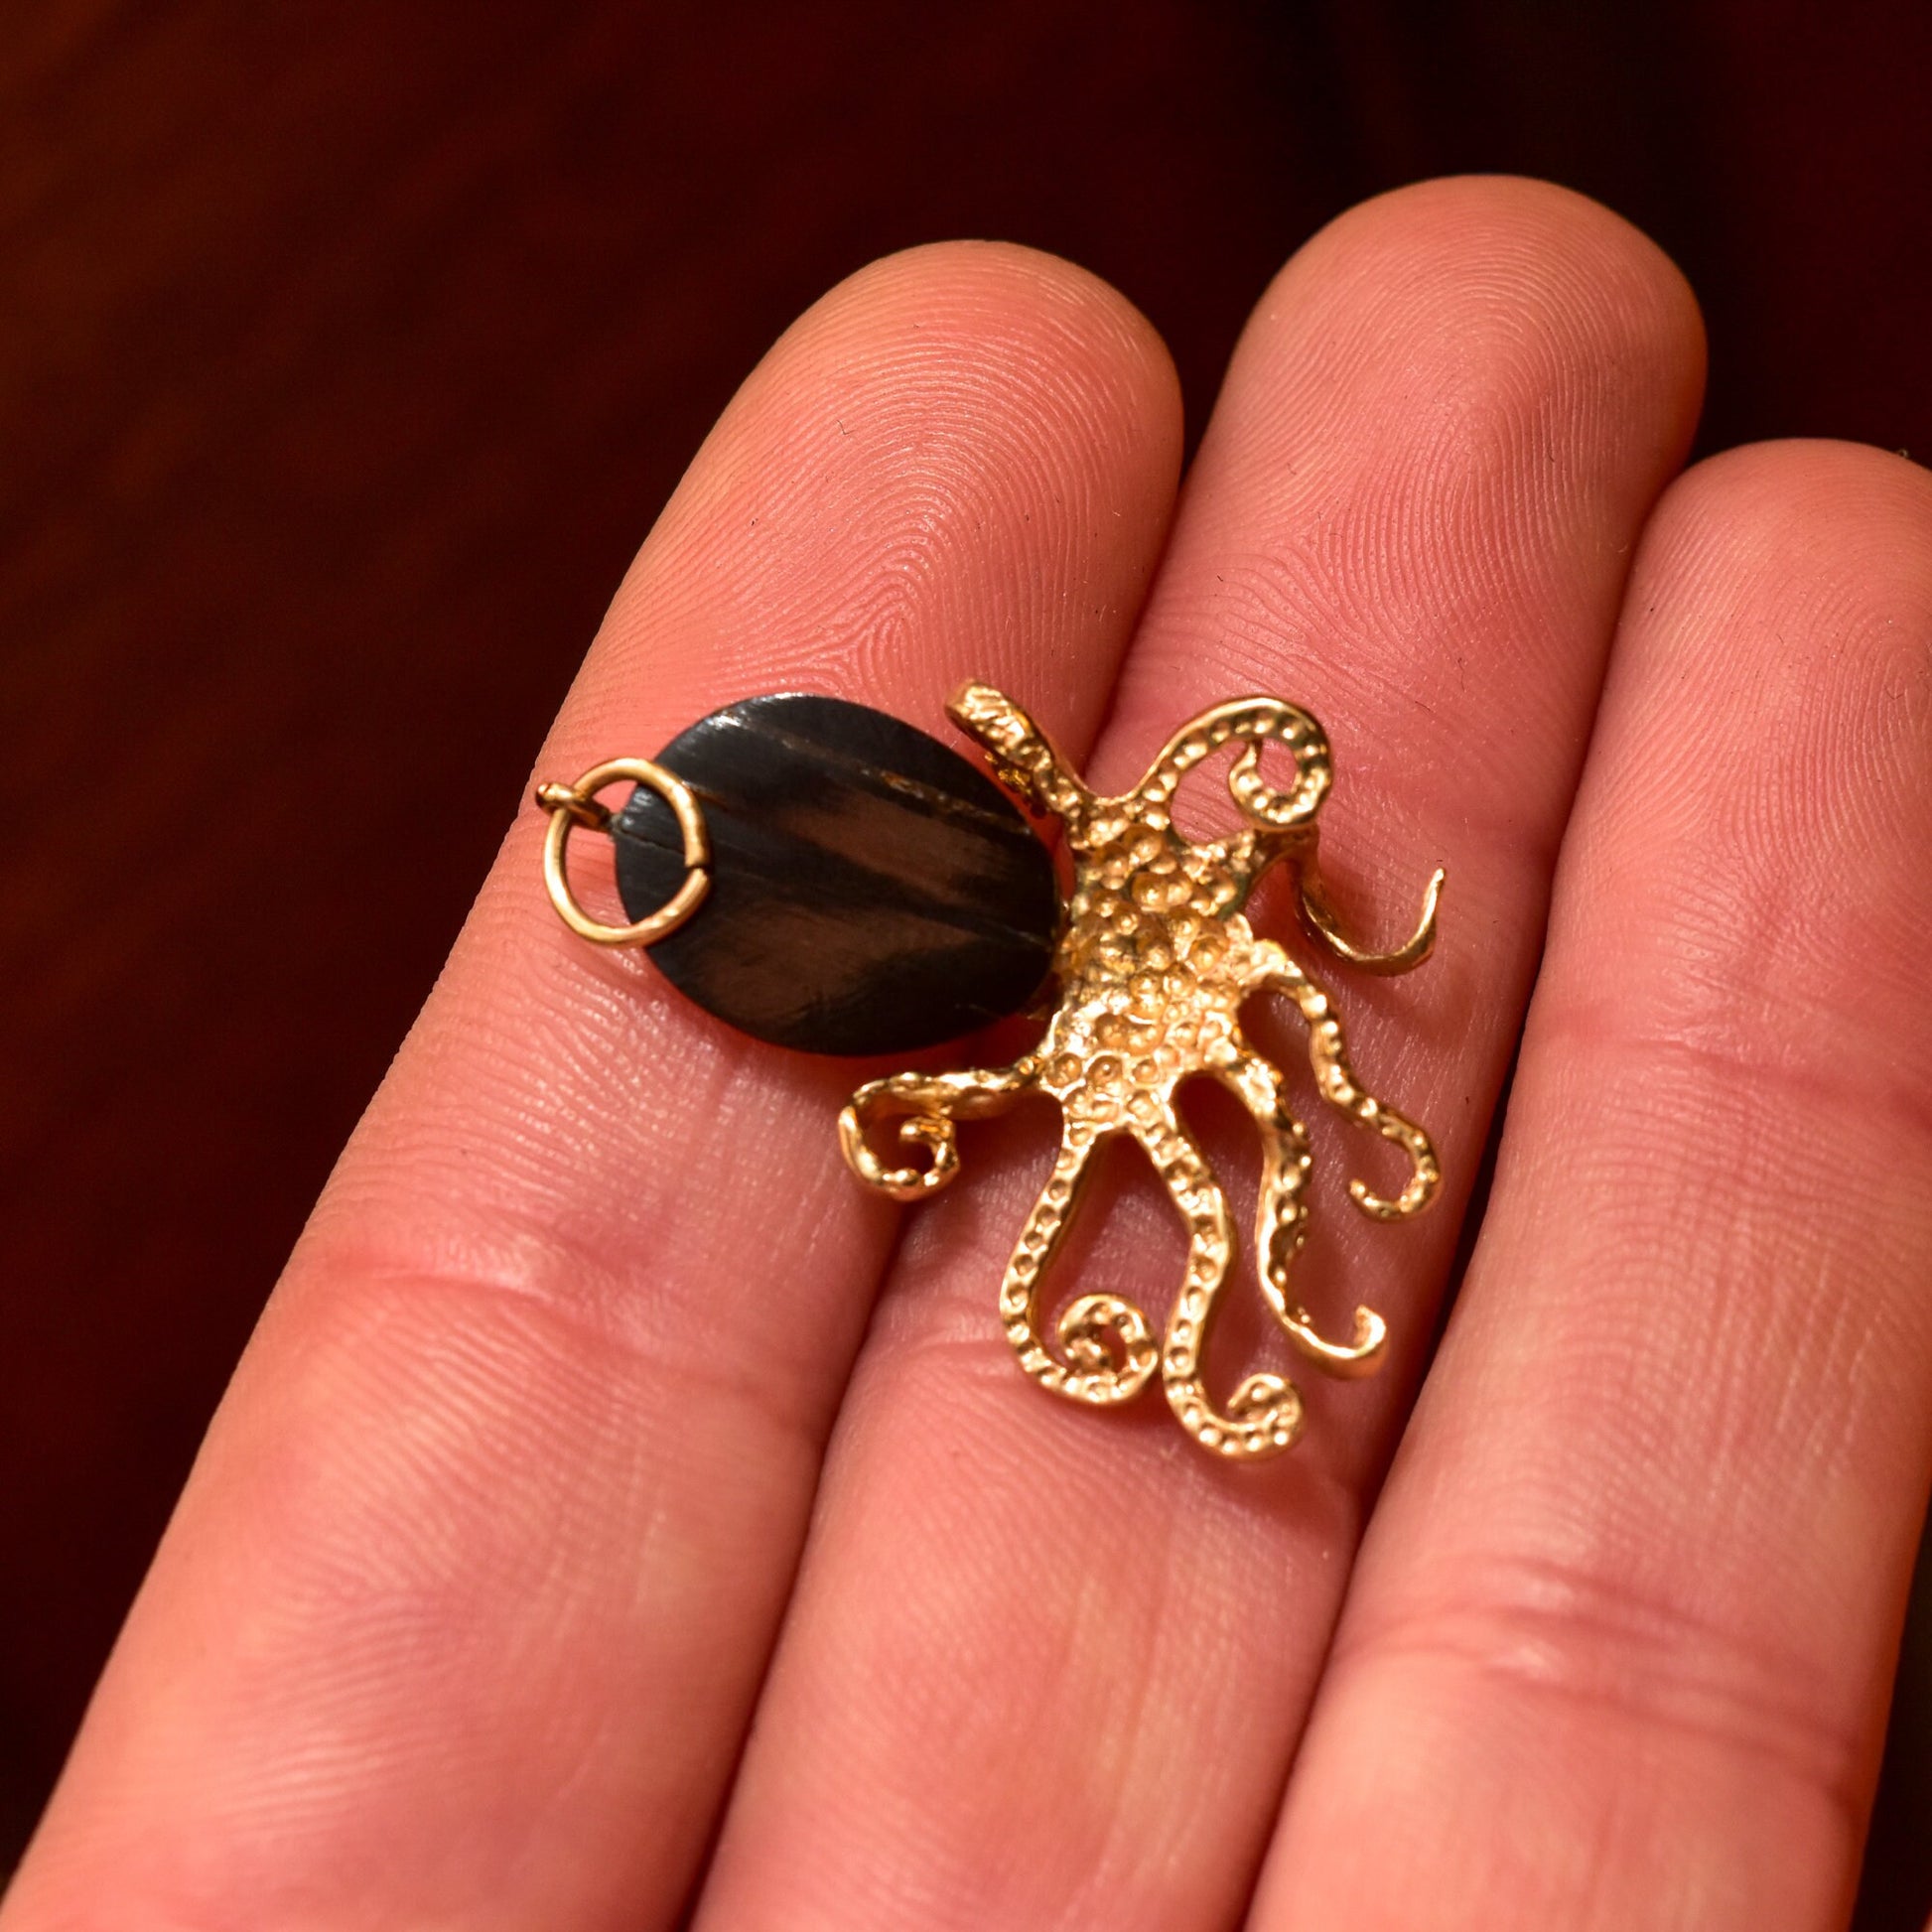 10K yellow gold octopus pendant with black coral center and diamond accents, held in palm of hand against deep red background